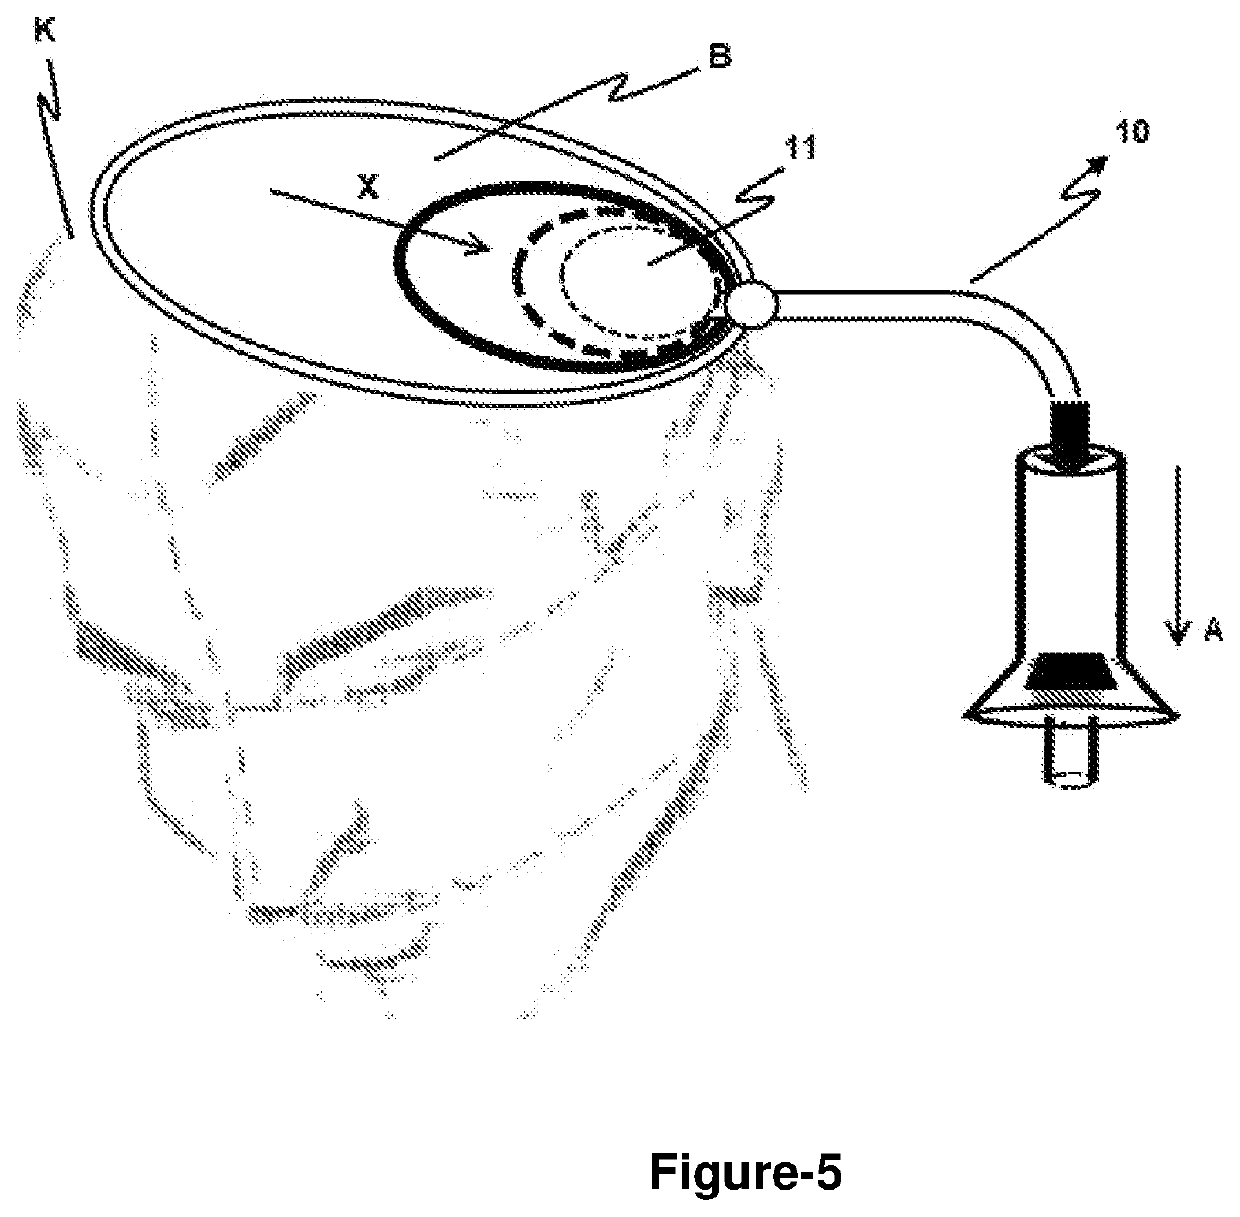 Pressure-regulated balloon apparatus positioned in the cavity formed in the brain after surgery